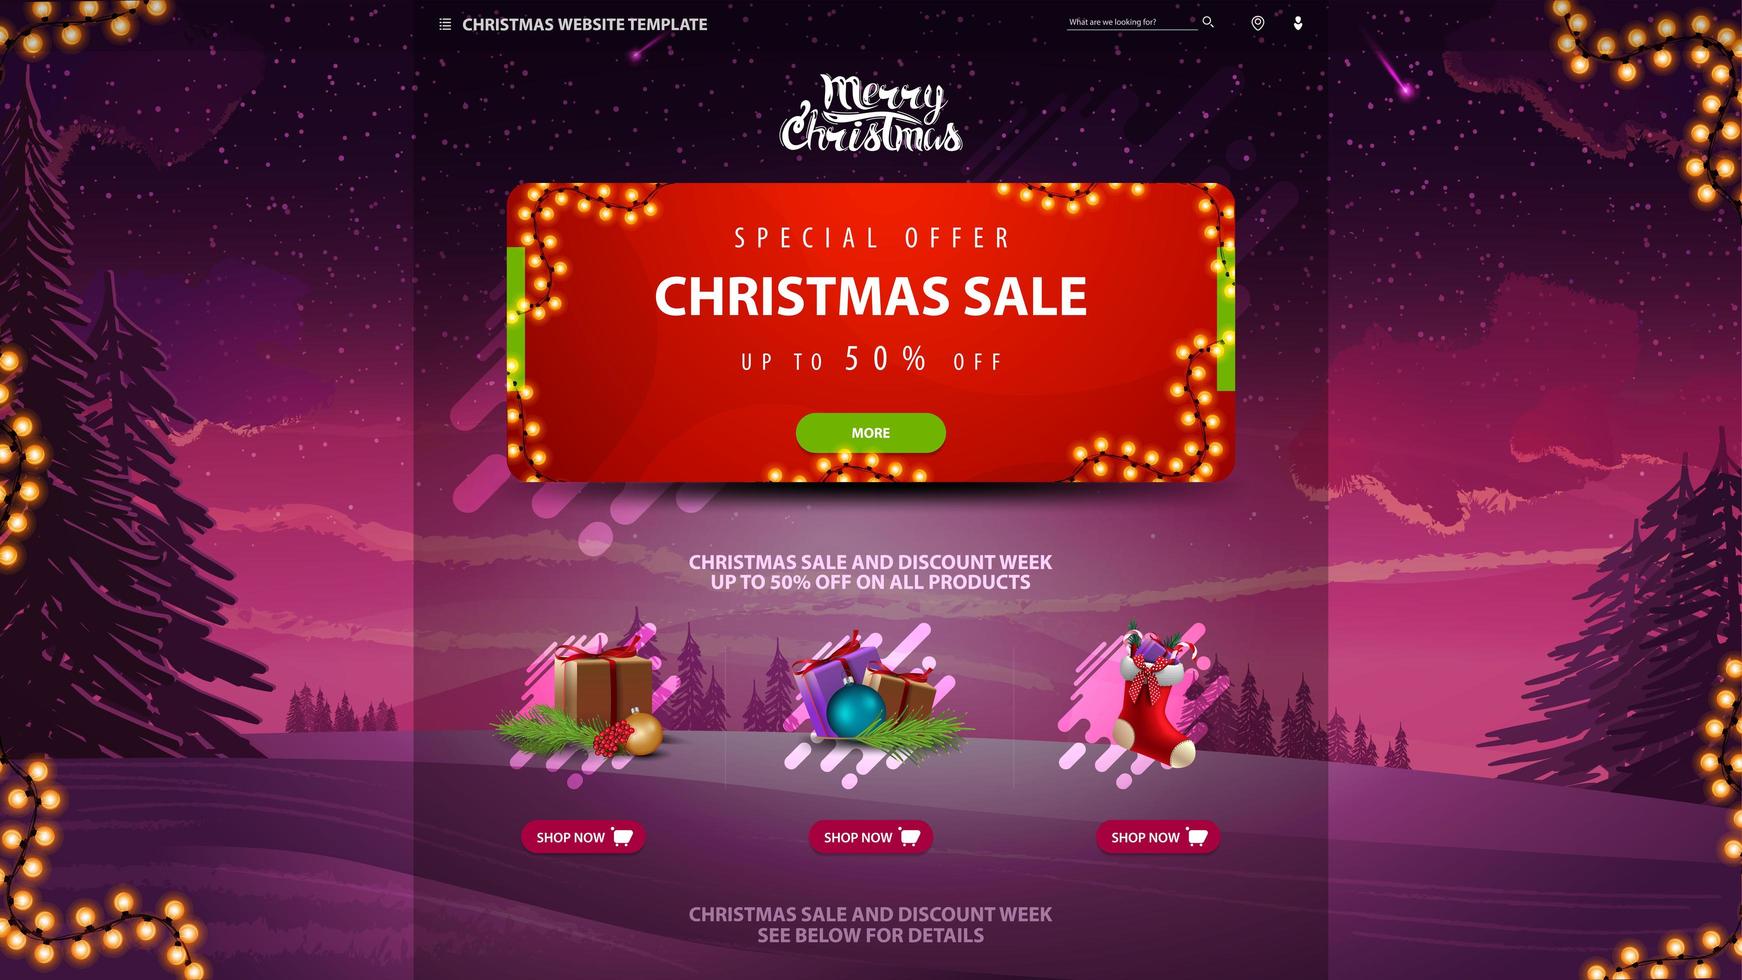 Christmas sale design website template with spruces, snow and purple sky in the background vector